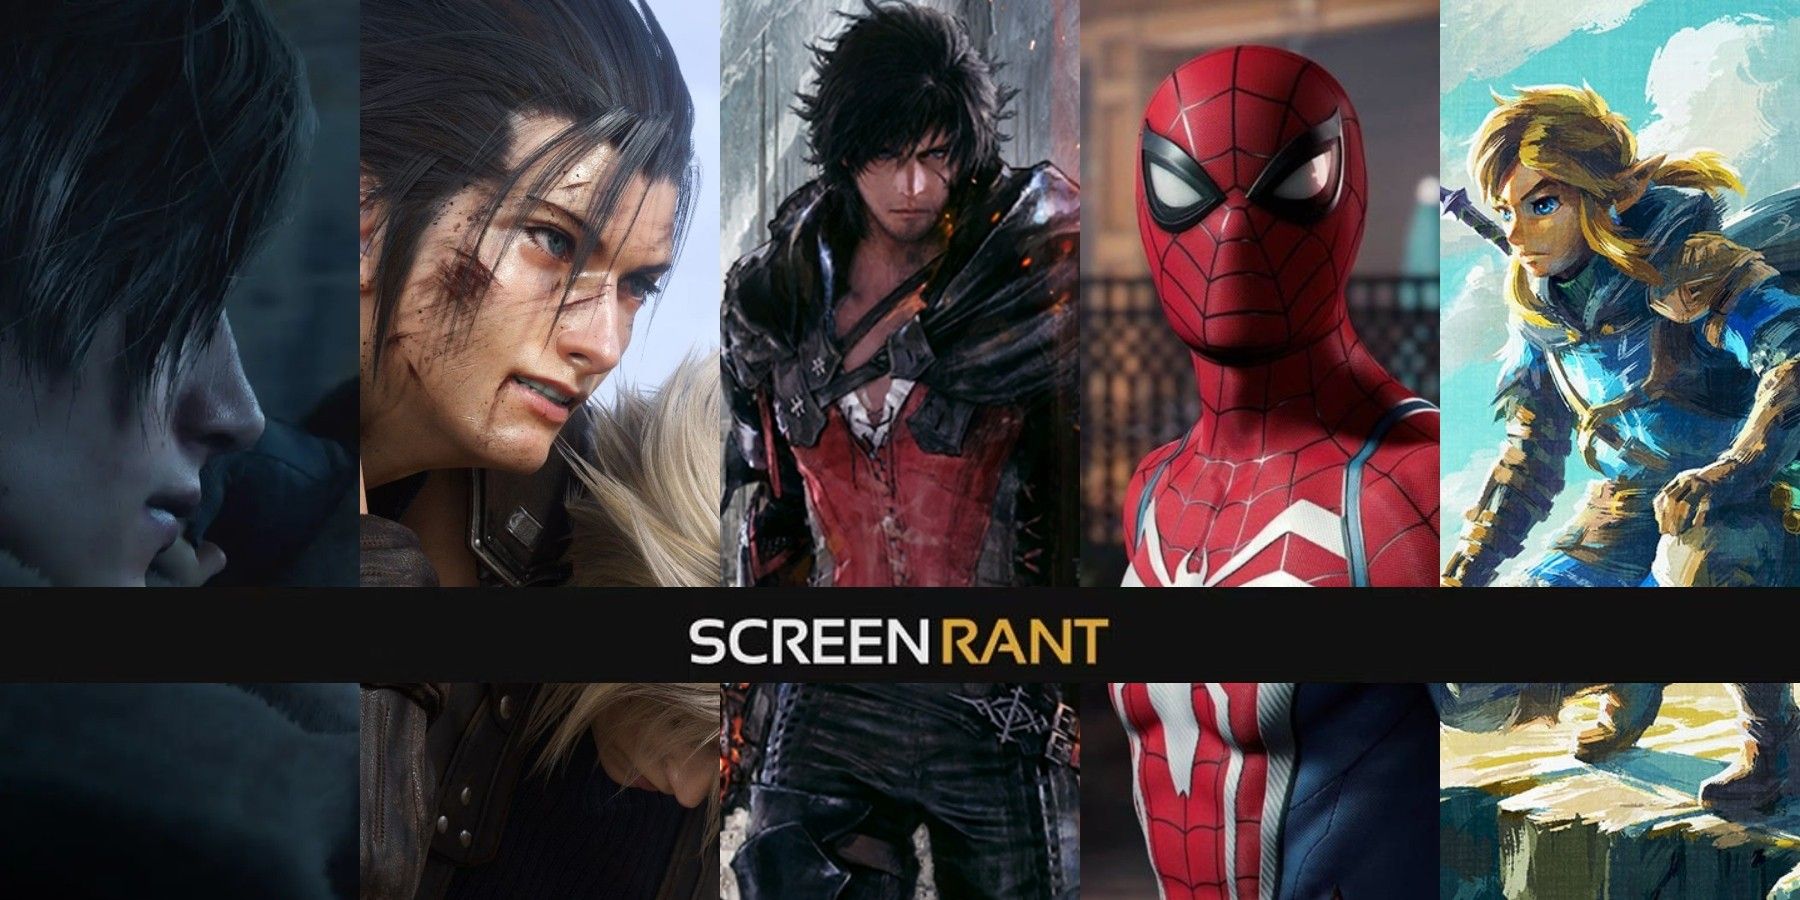 Series of rectangular vertical images of Leon from Resident Evil 4 Remake, characters from FF7 Remake part 2 and FF16, Spider-Man in Marvel's Spider-Man 2, and Link in Zelda: Tears of the Kingdom. Screen Rant logo on top.